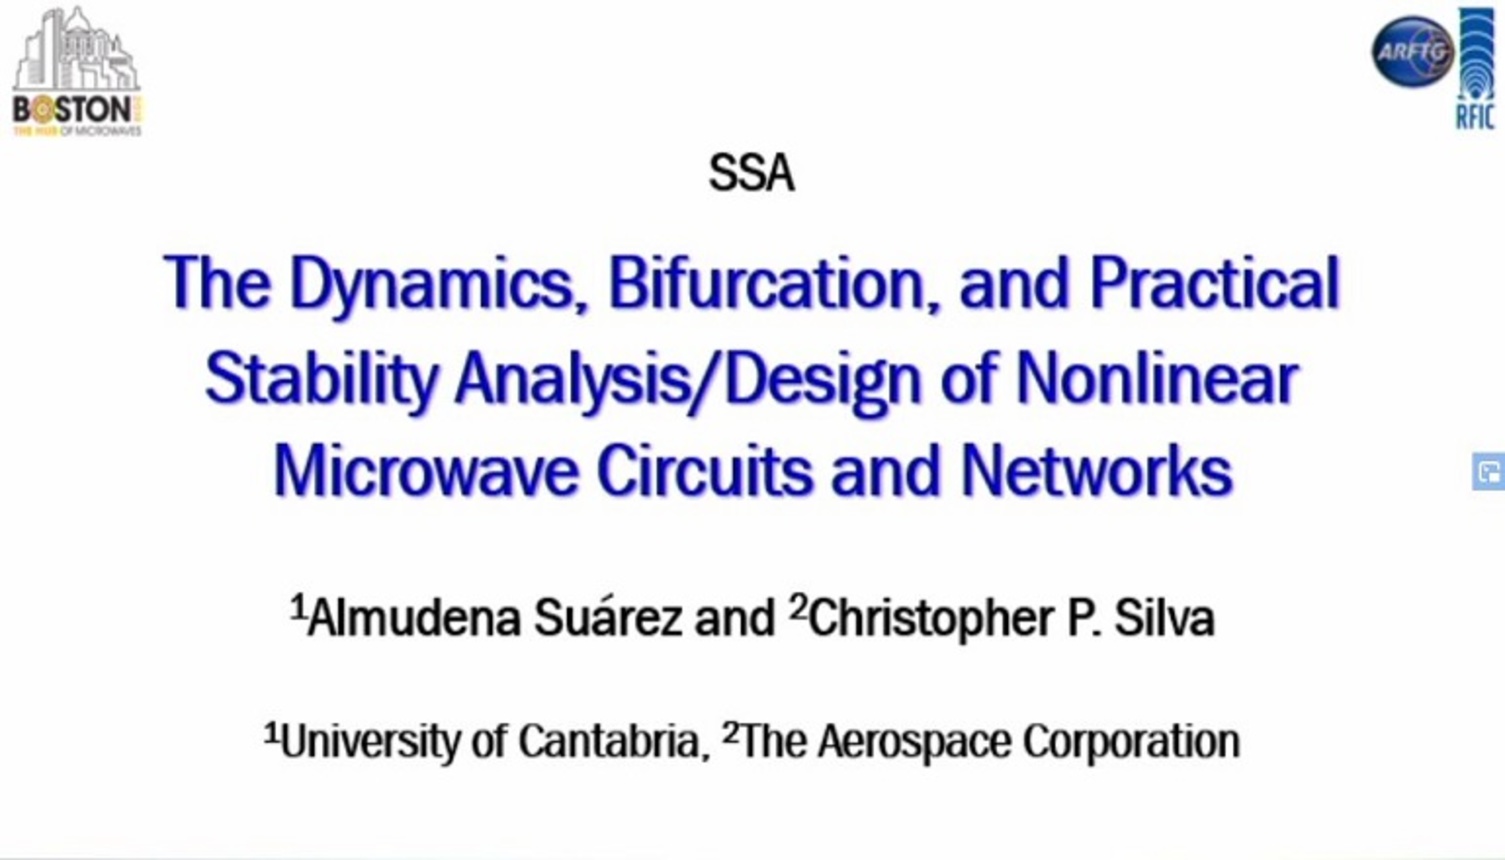 The Dynamics, Bifurcation, and Practical Stability Analysis/Design of Nonlinear Microwave Circuits and Networks Part 3